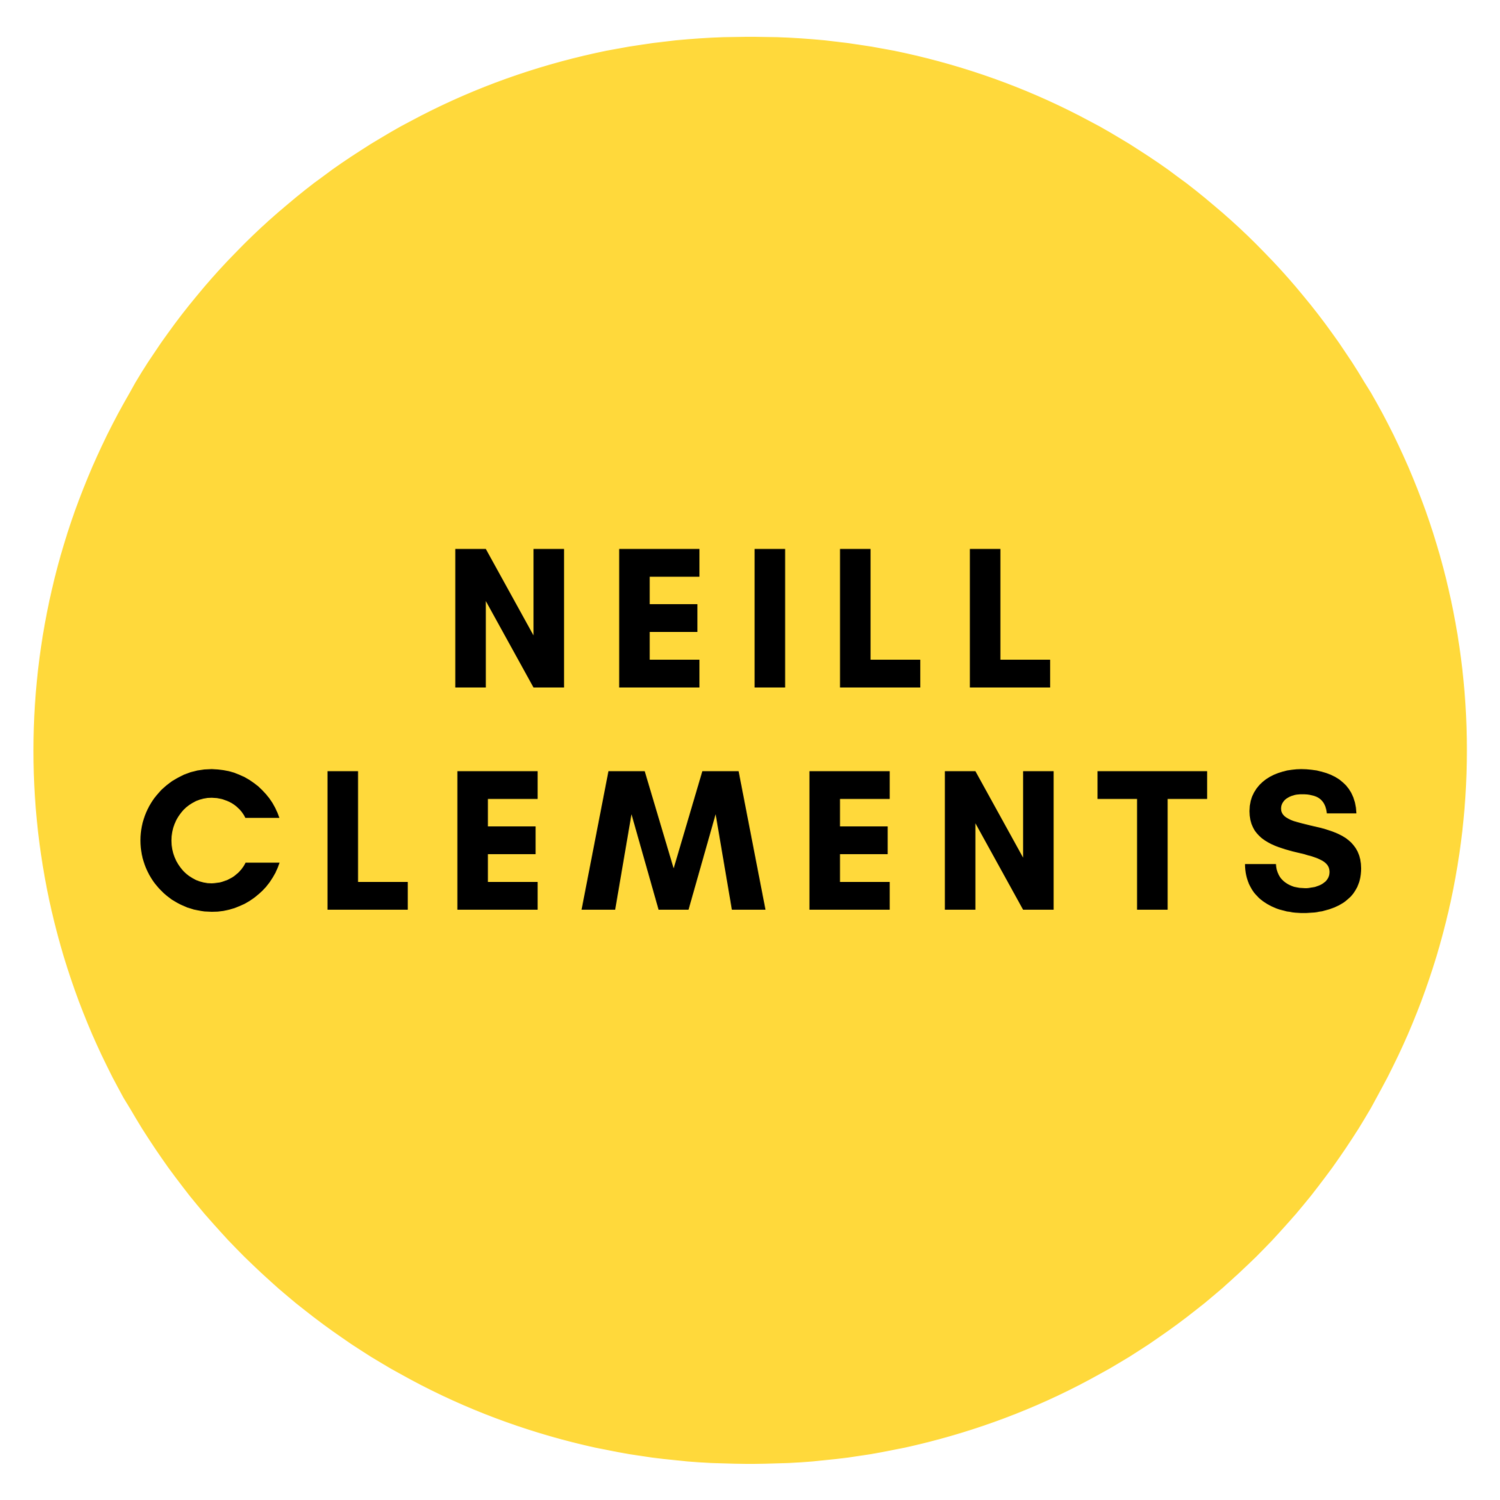 Neill Clements